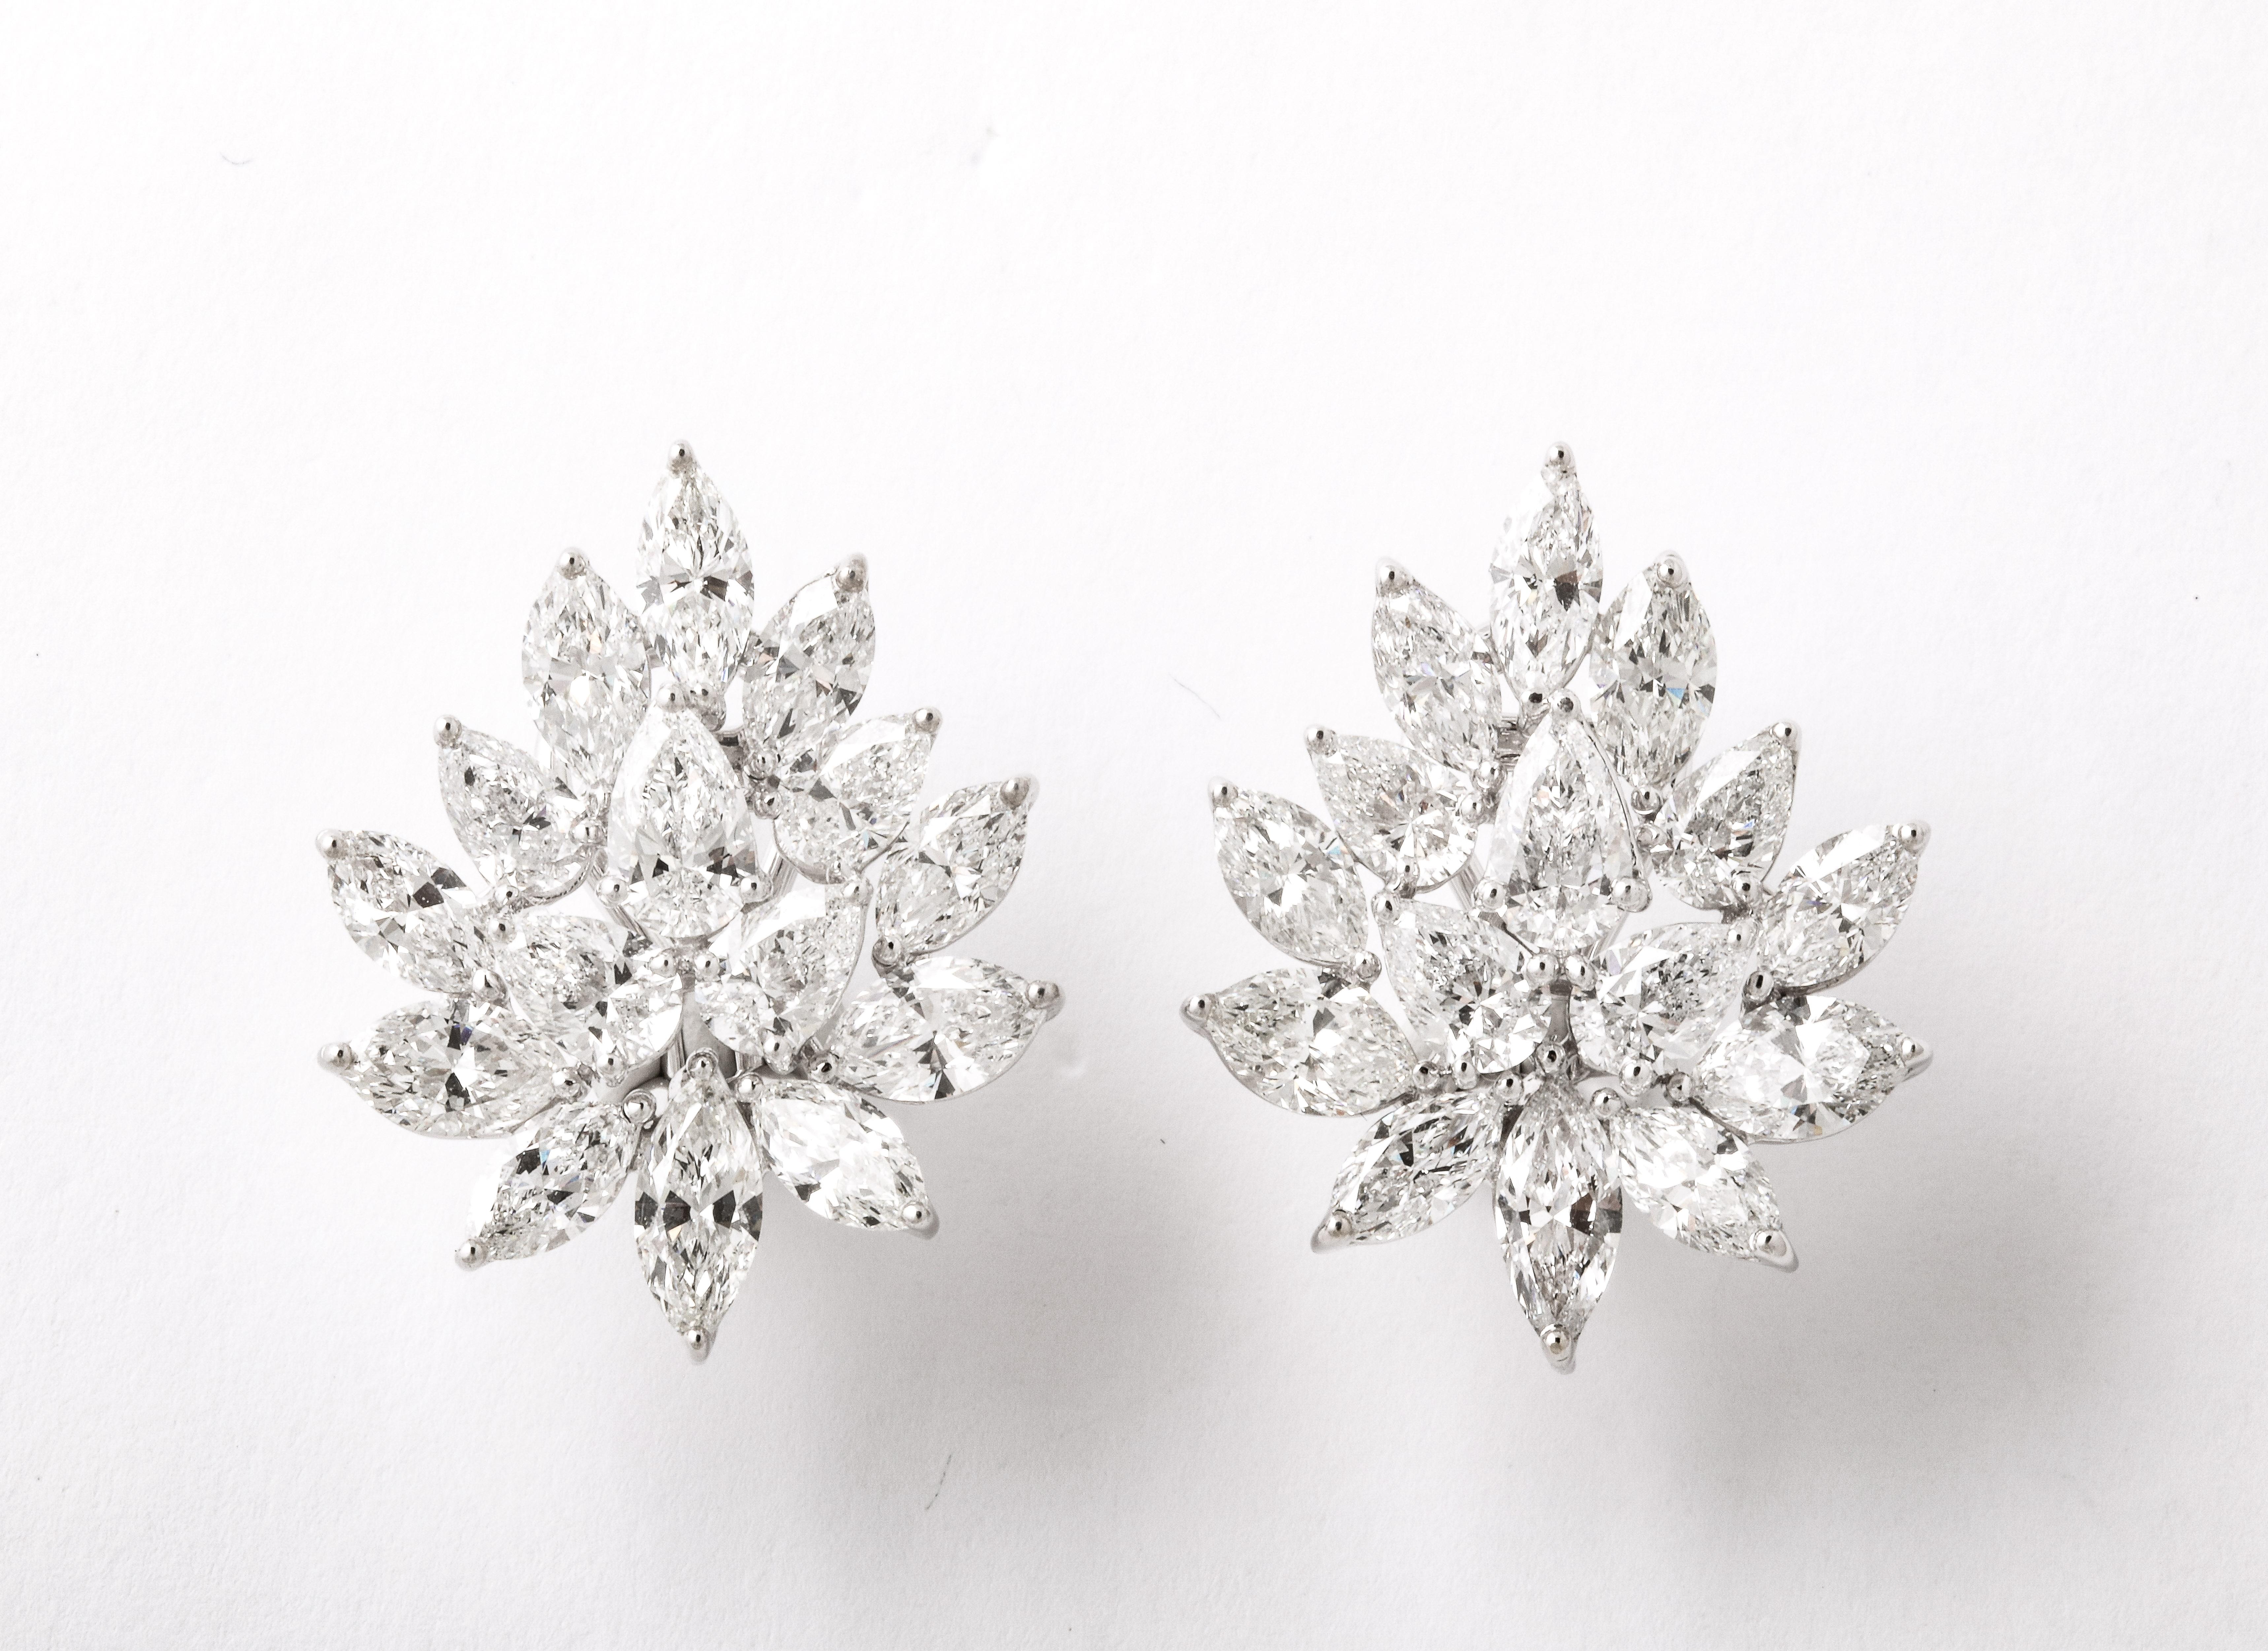 
A grand cluster earring. 

14.86 carats of white pear and marquise shape diamonds set in 18k white gold. 

Approximately 1.18 inches long x .90 inches wide. 

A fabulous piece!